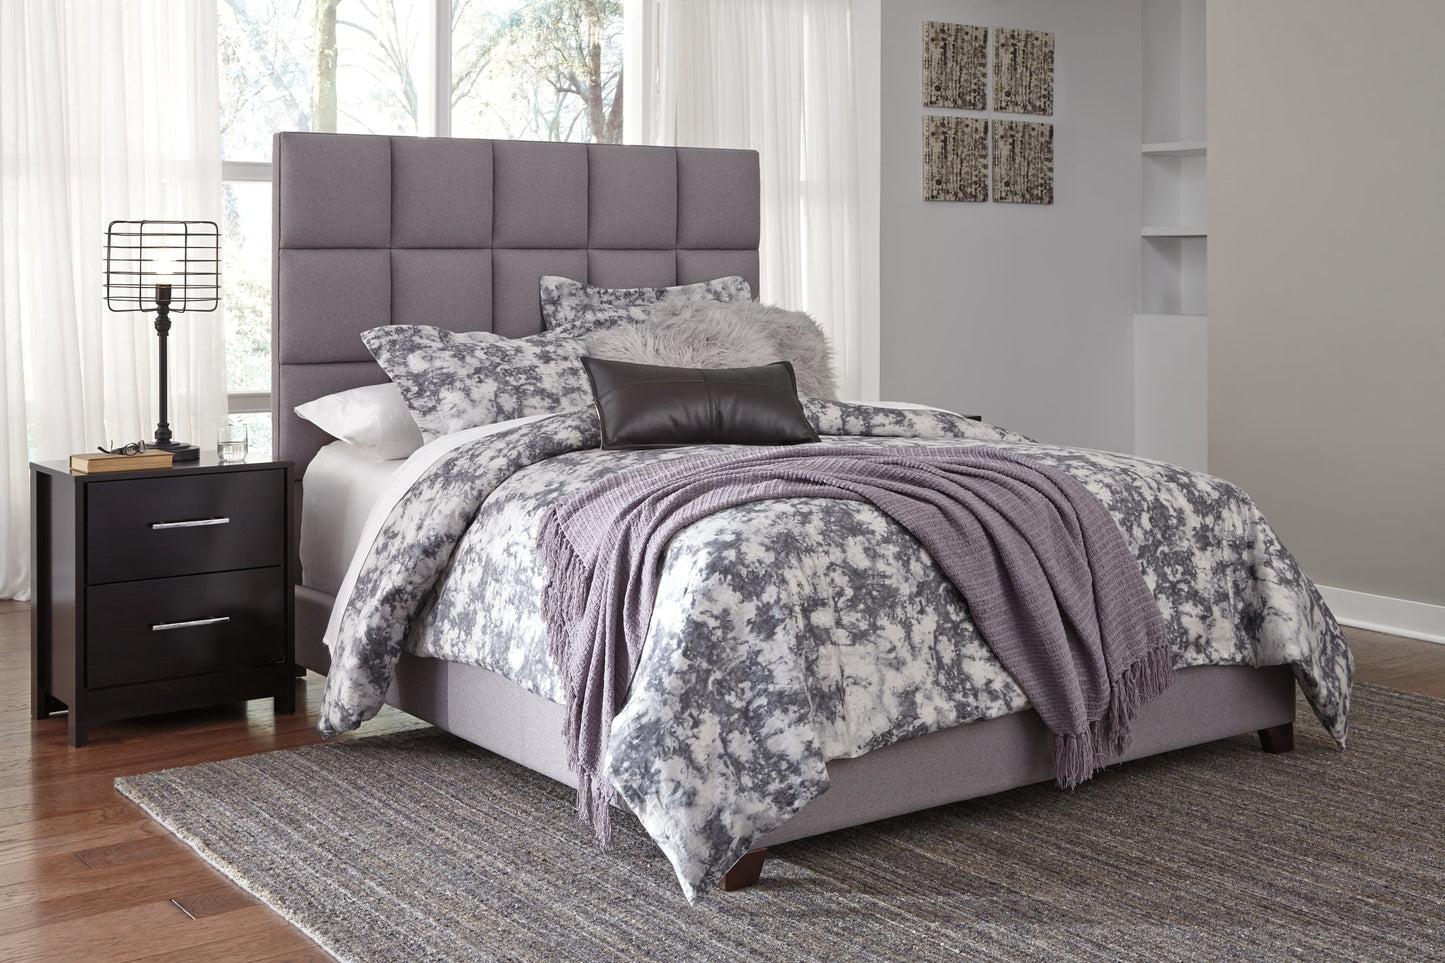 Dolante Queen Upholstered Bed at Walker Mattress and Furniture Locations in Cedar Park and Belton TX.